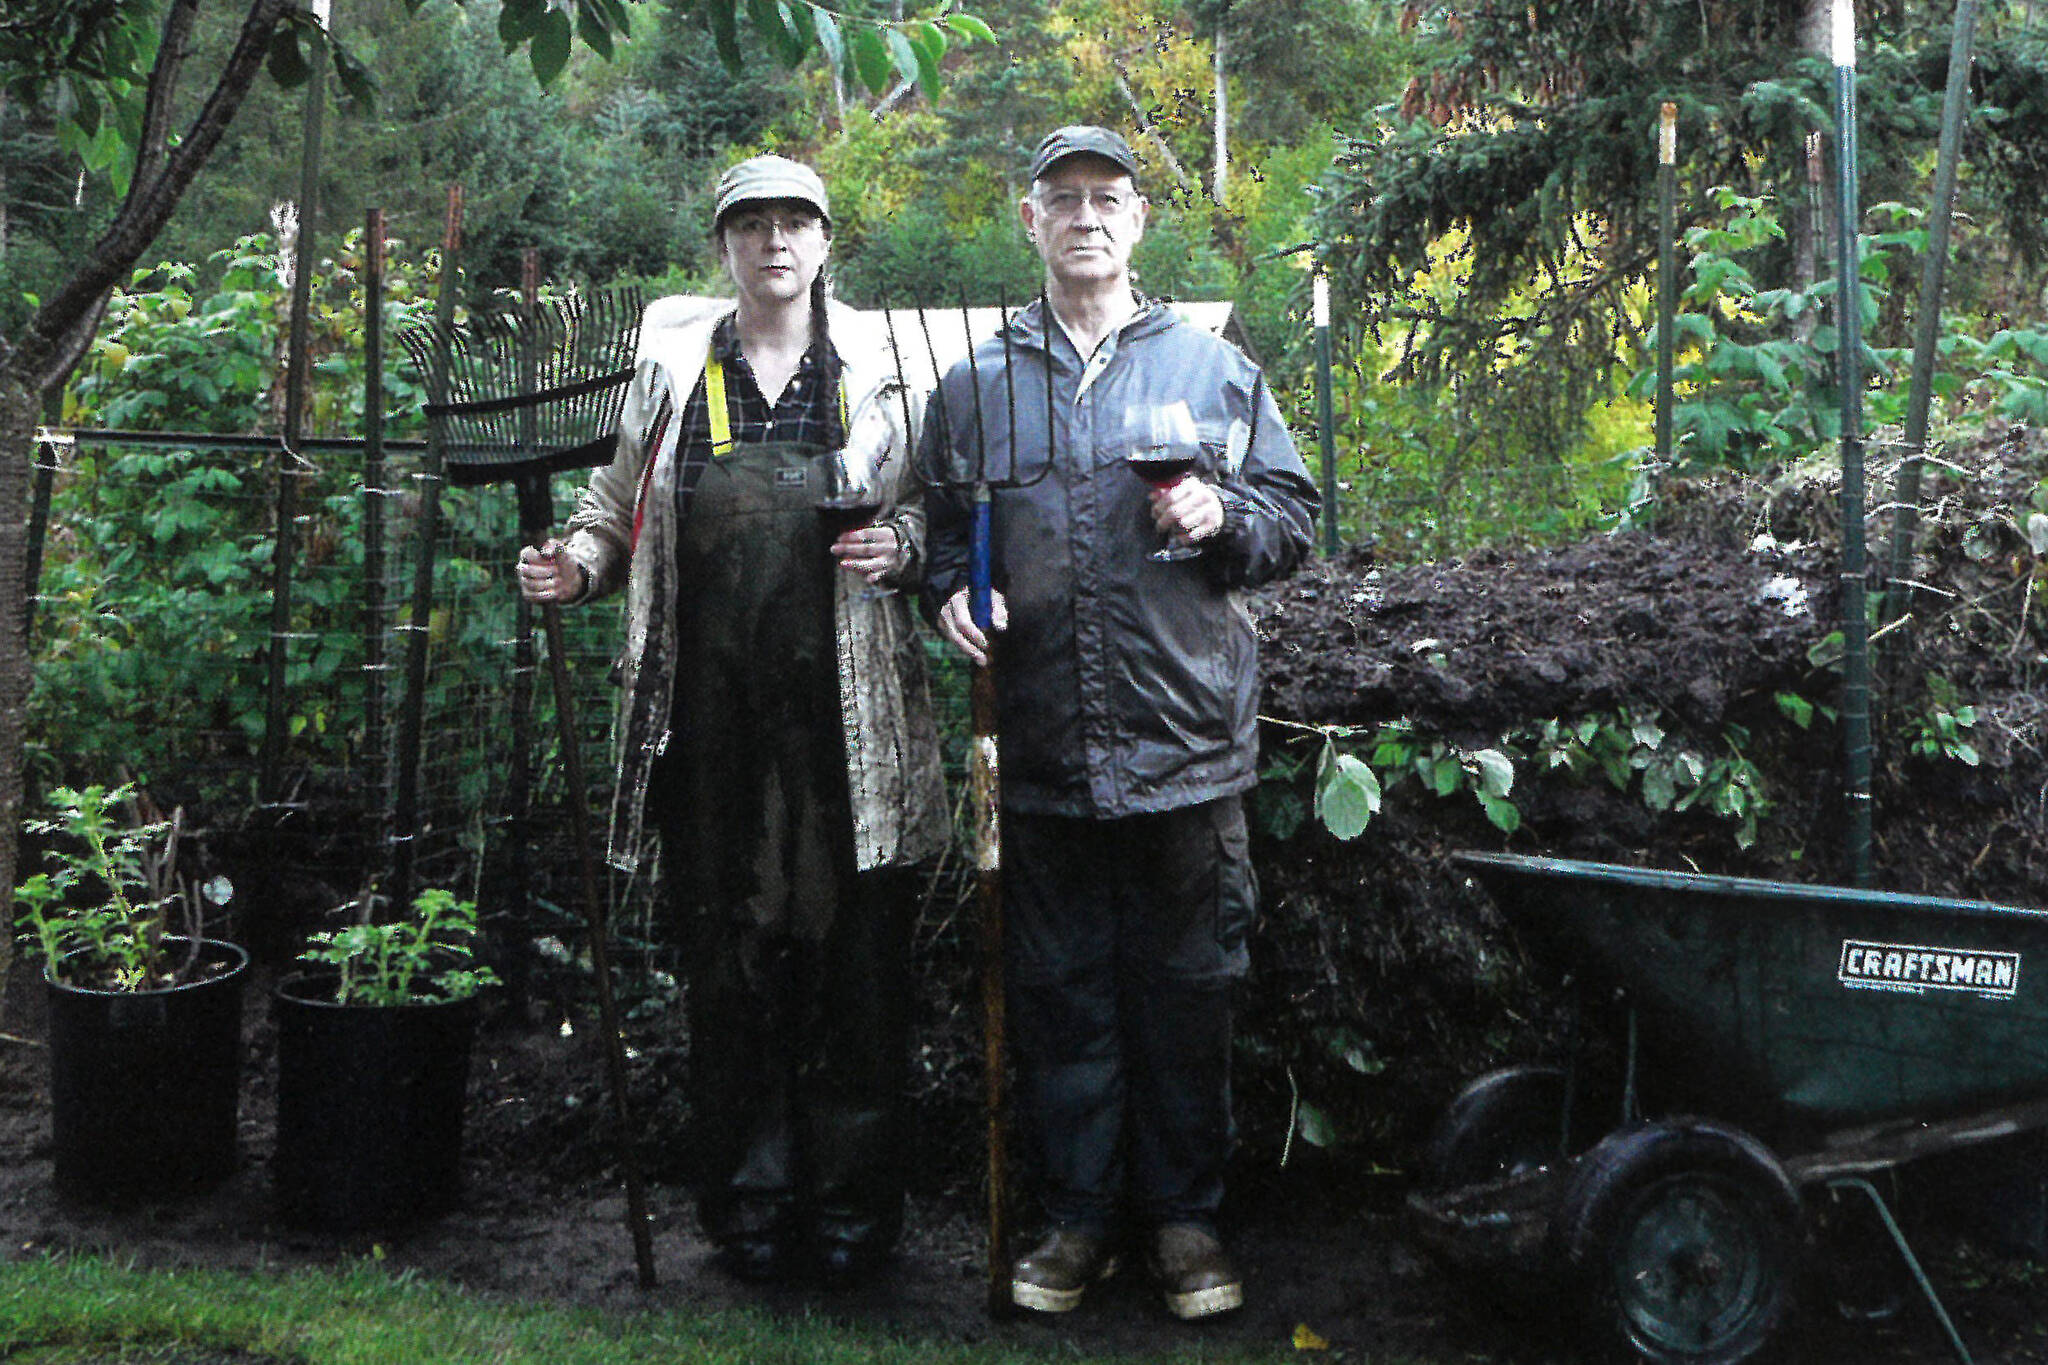 Shelli and Mike Gordon pose in October 2011 at their Halibut Cove, Alaska, home in an Alaska Gothic version of Grant Wood’s “American Gothic” painting. (Photo courtesy of Mike Gordon)